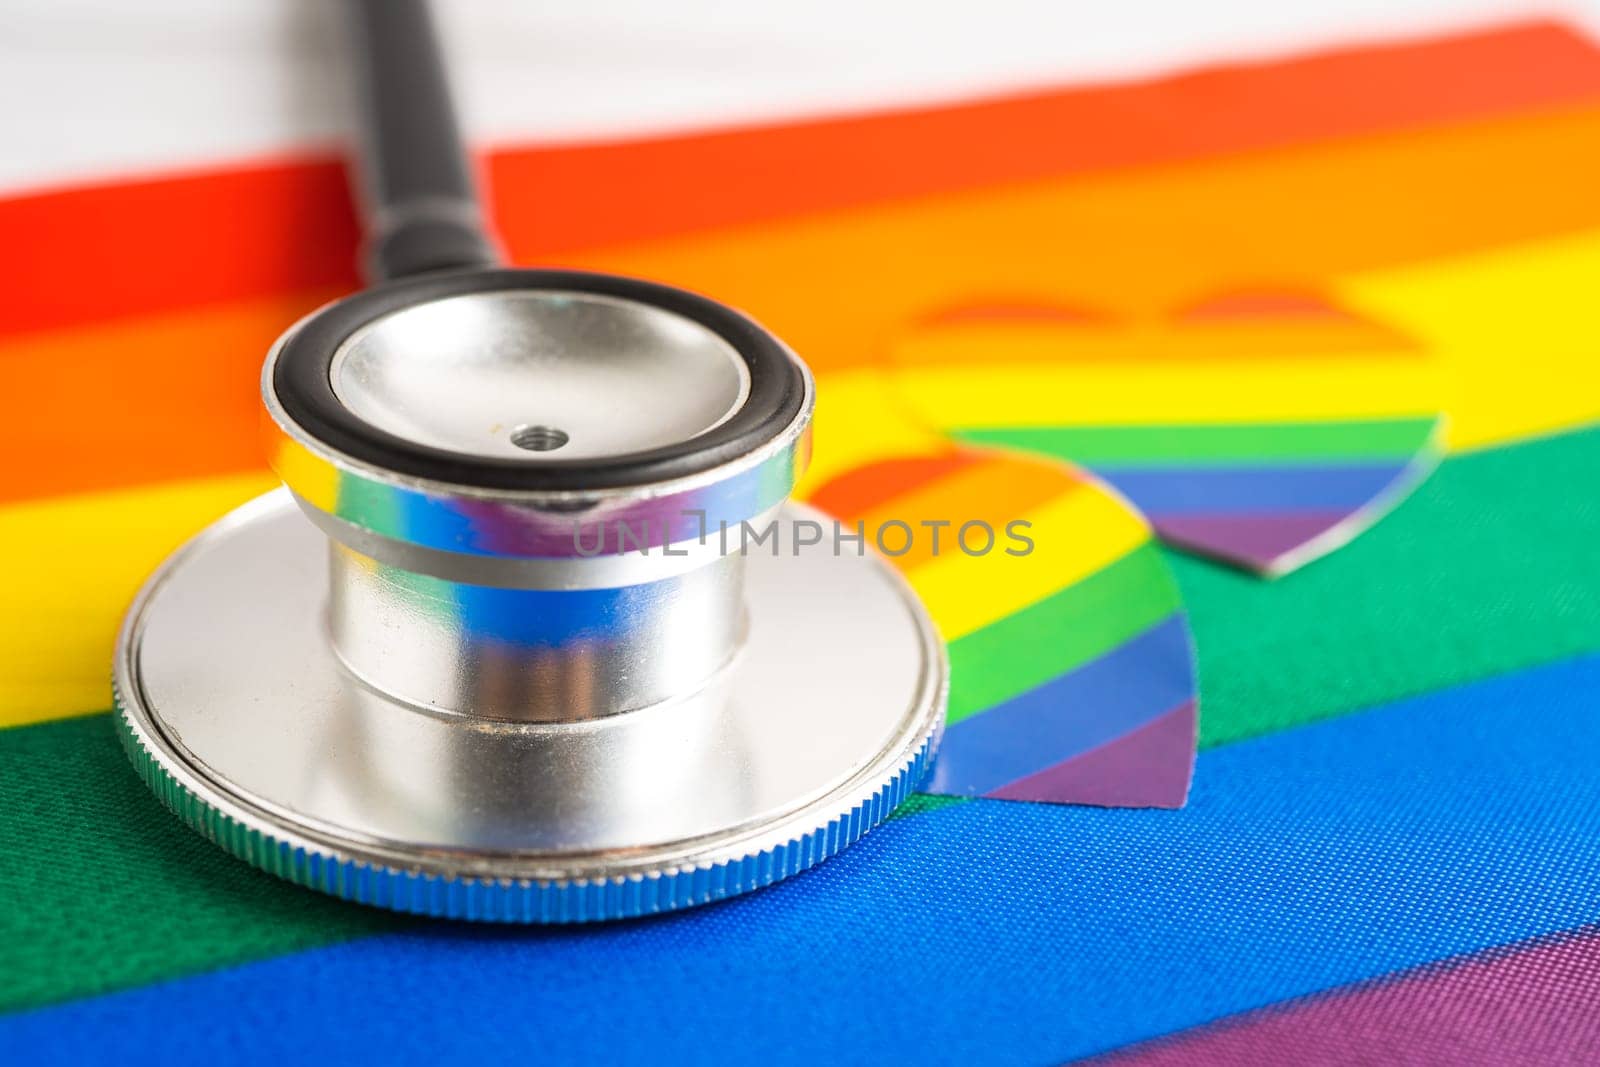 Black stethoscope on rainbow flag with heart, symbol of LGBT pride month celebrate annual in June social, symbol of gay, lesbian, bisexual, transgender, human rights and peace. by pamai